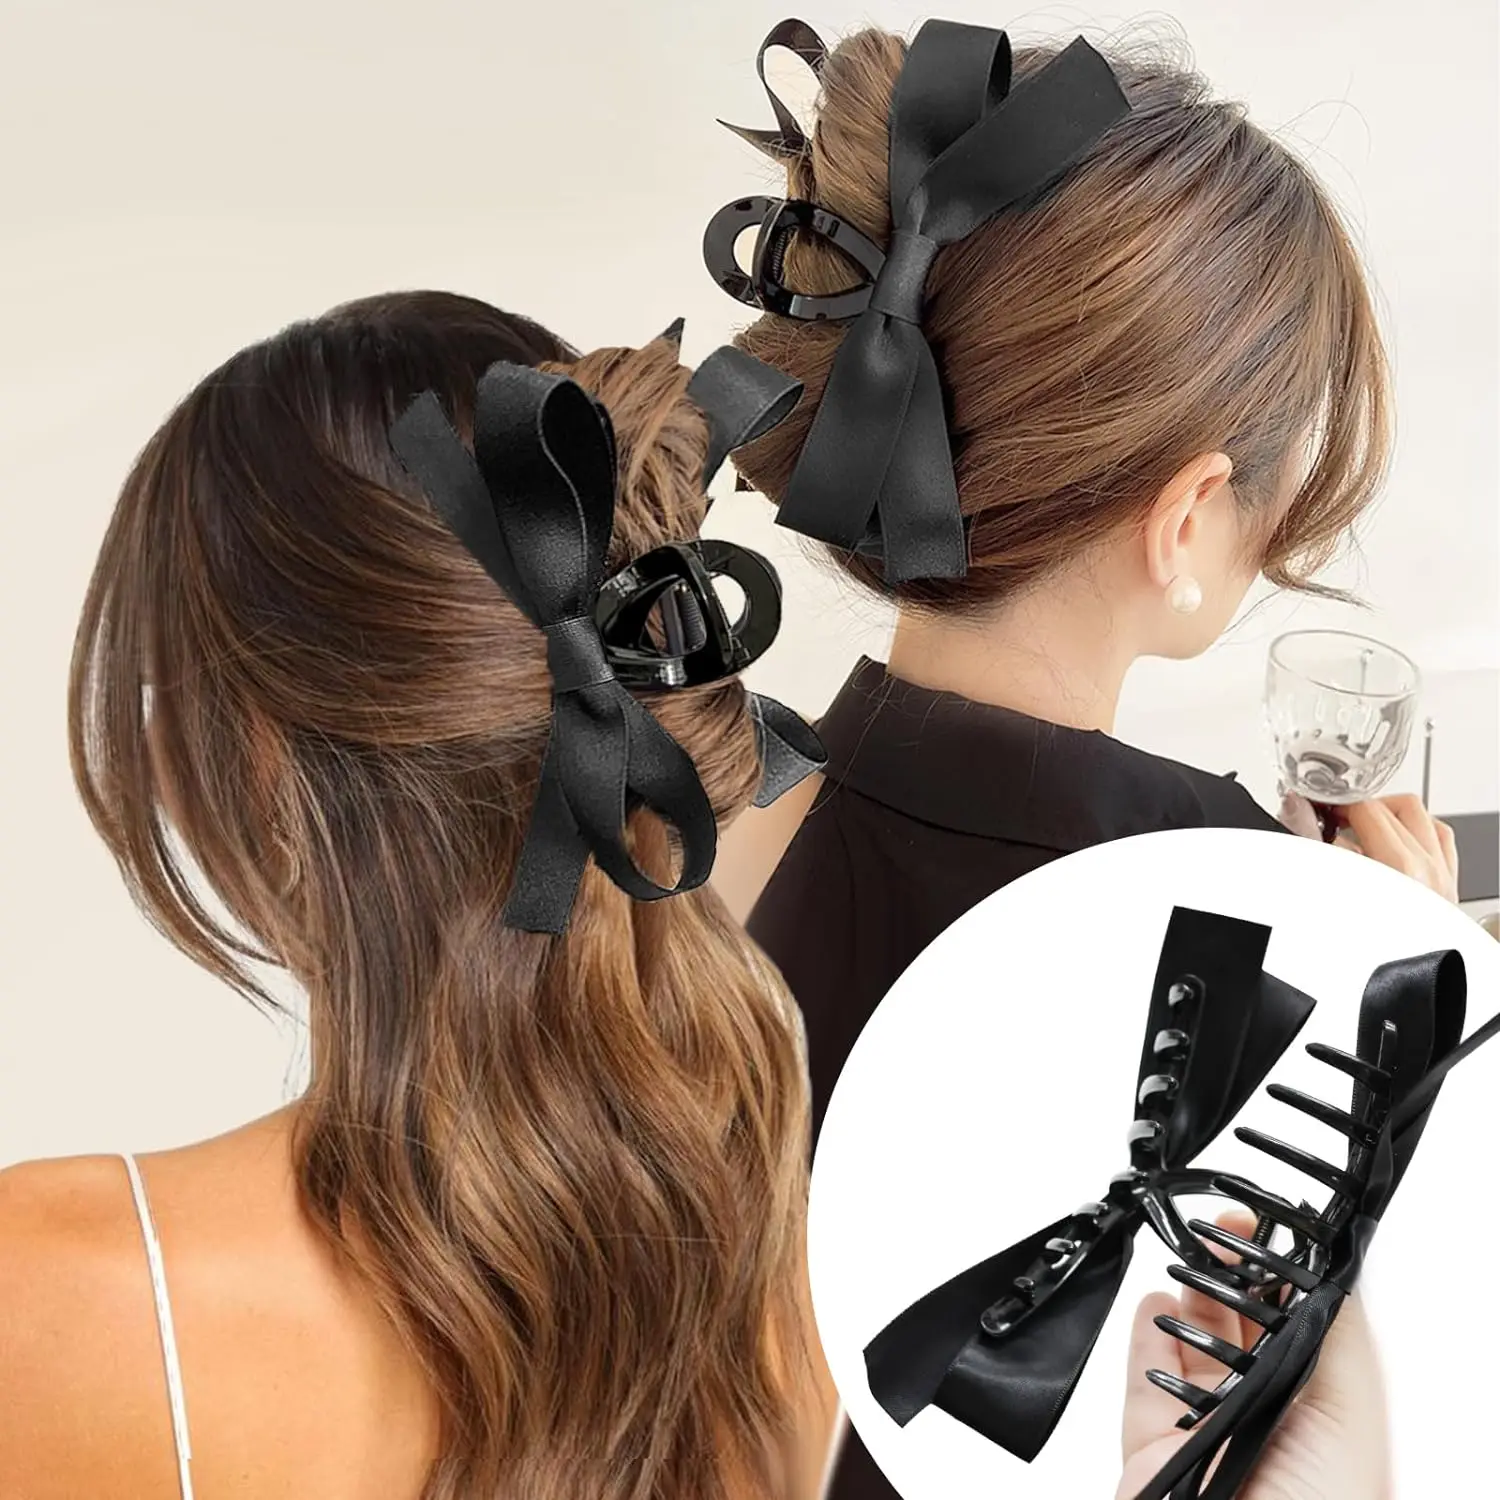 

Wholesale Big Black Bow Hair Clips for Women Silky Satin Large Hair Barrettes Accessories with Soft Bow Knot Hair Bows For Girls